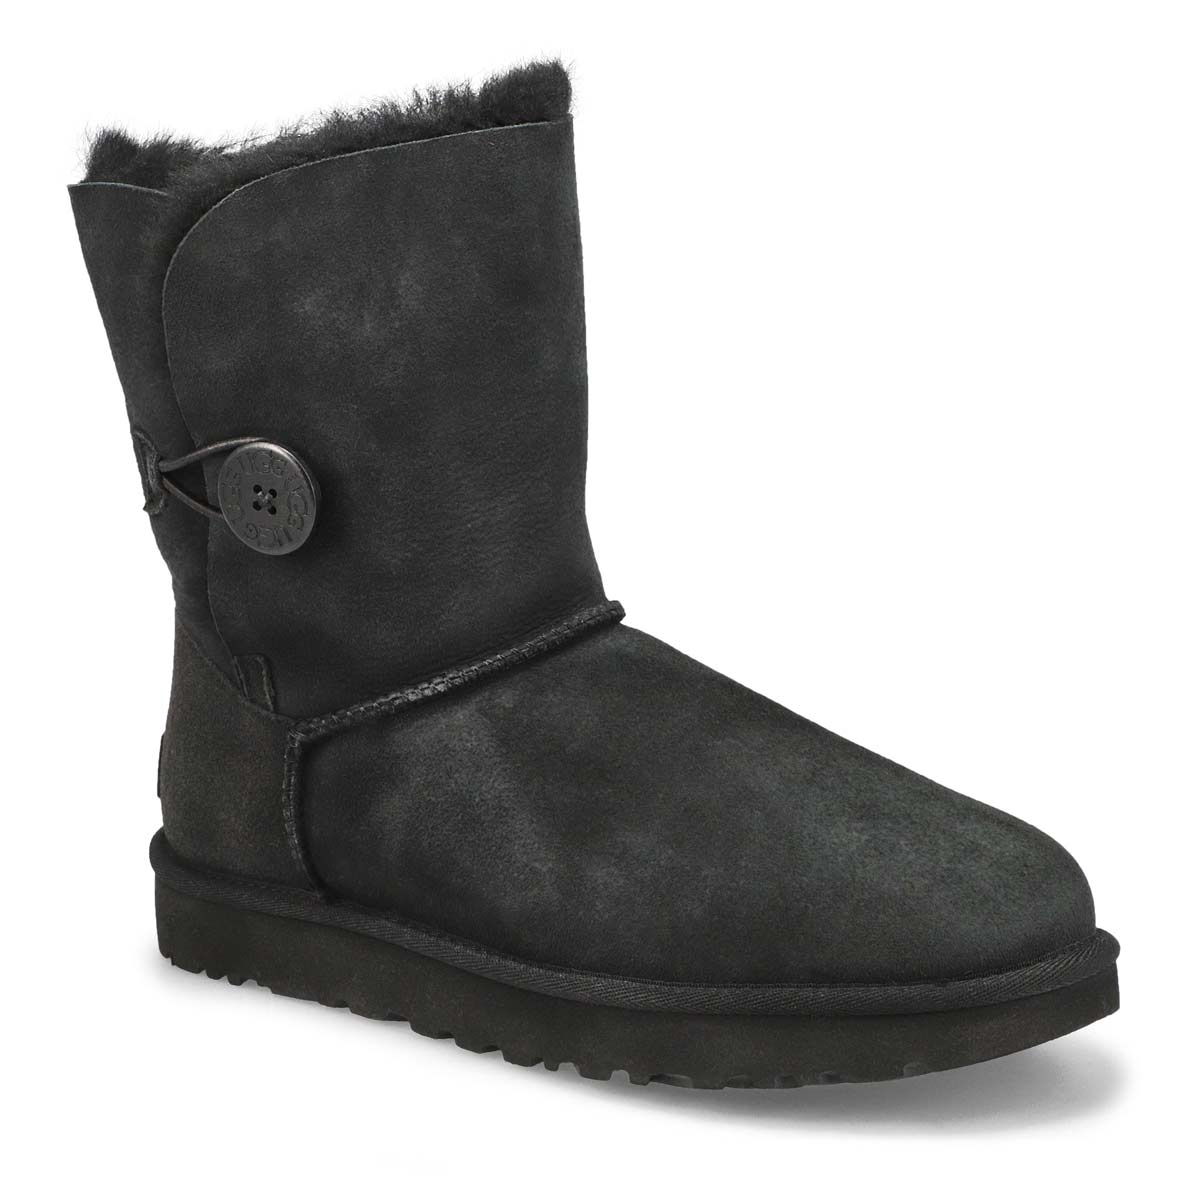 black ugg boots with buttons